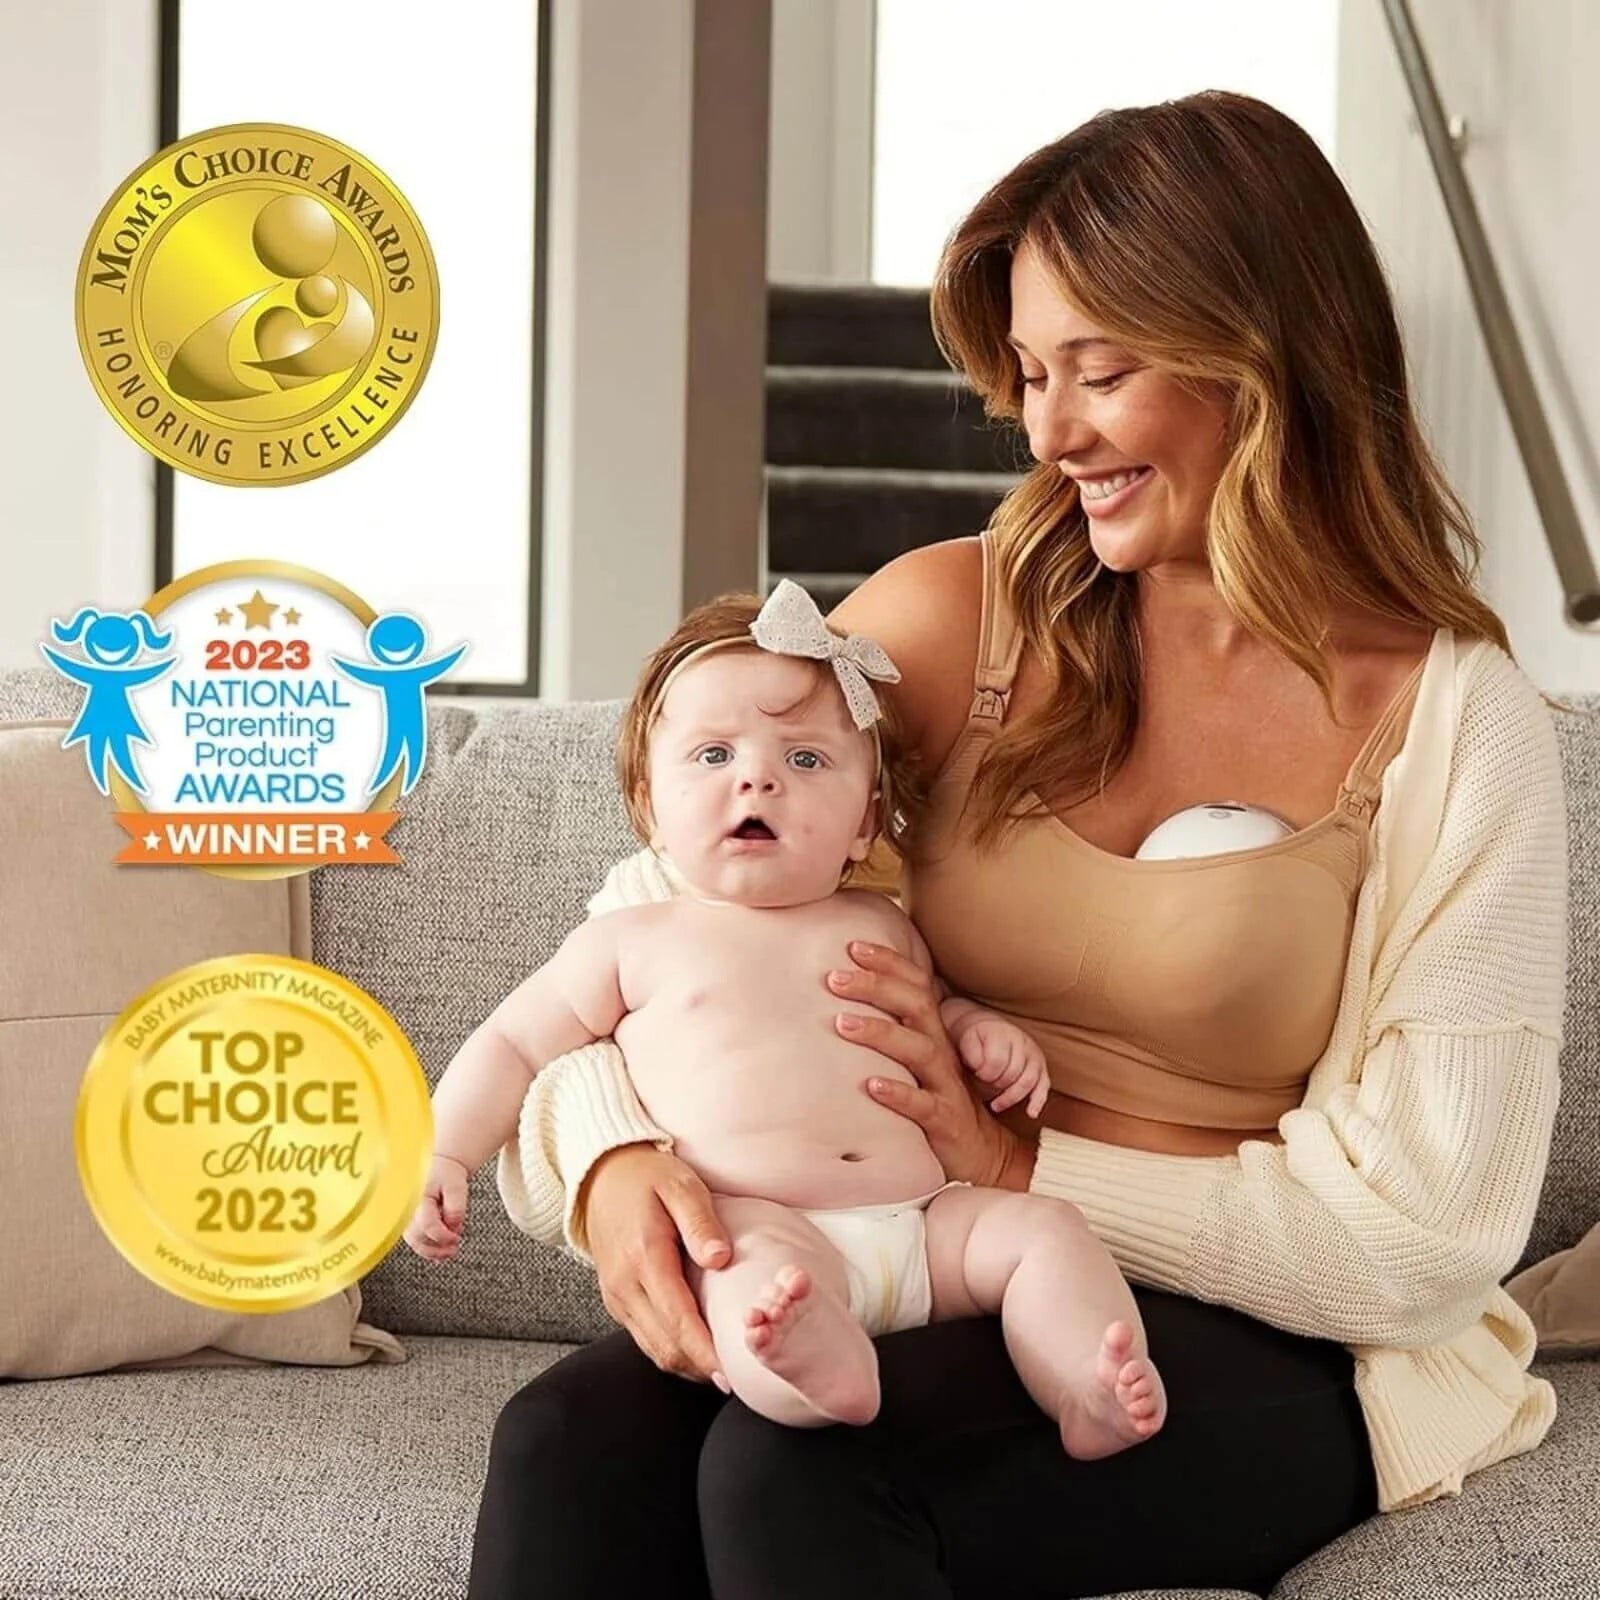  Momcozy Breast Pump Hands Free M5, Wearable Breast